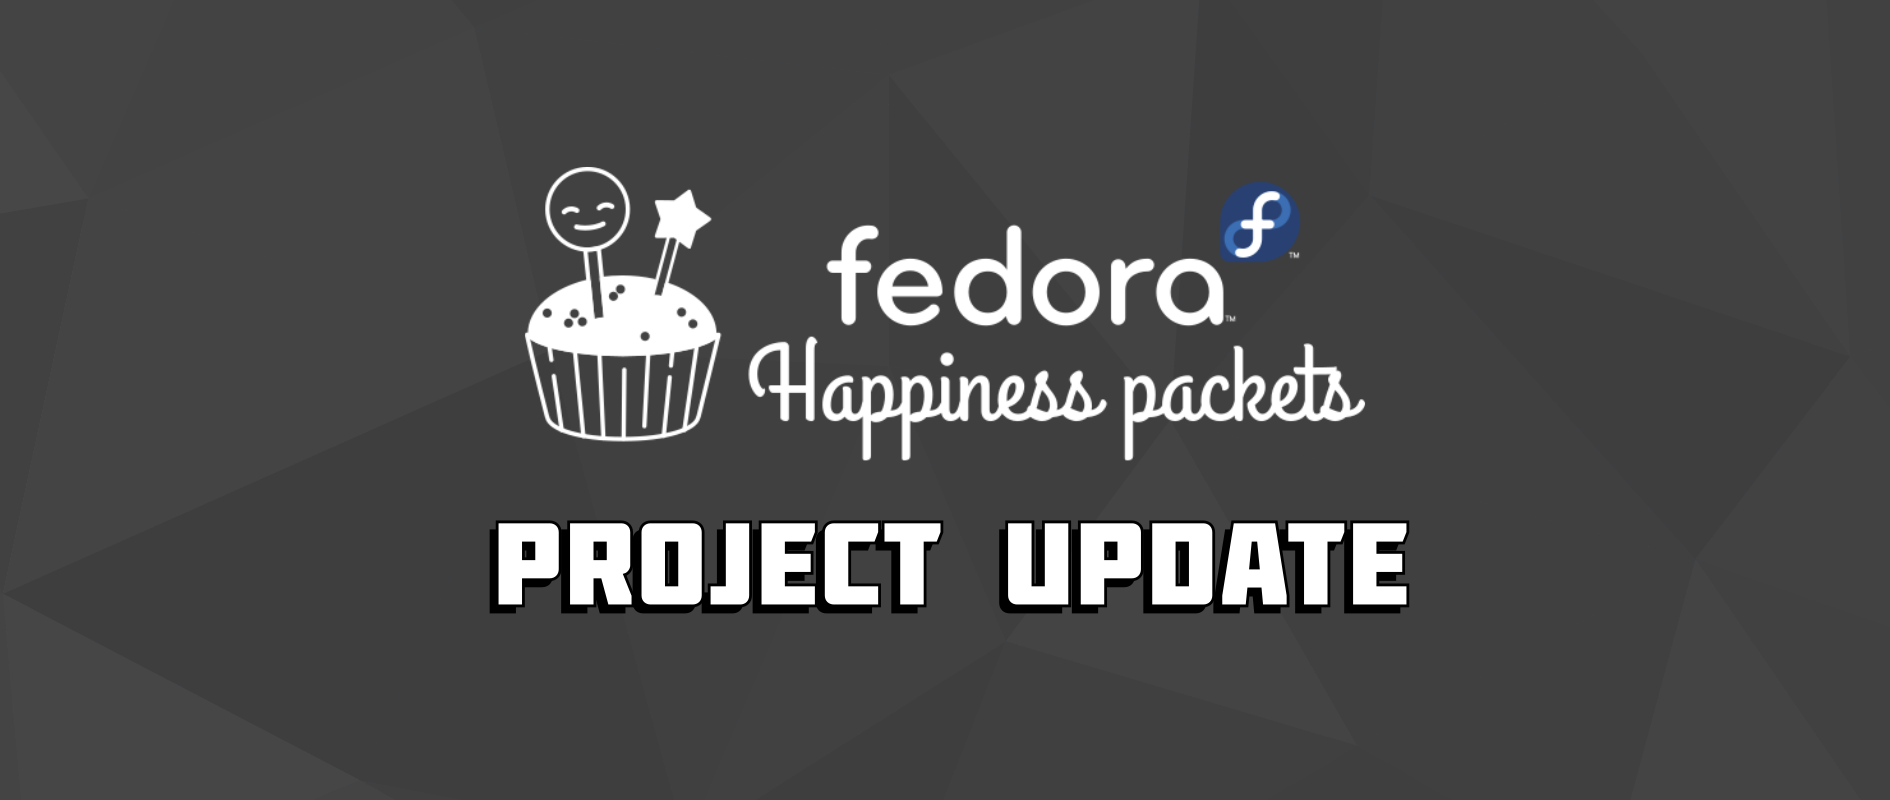 Fedora Happiness Packets - project update